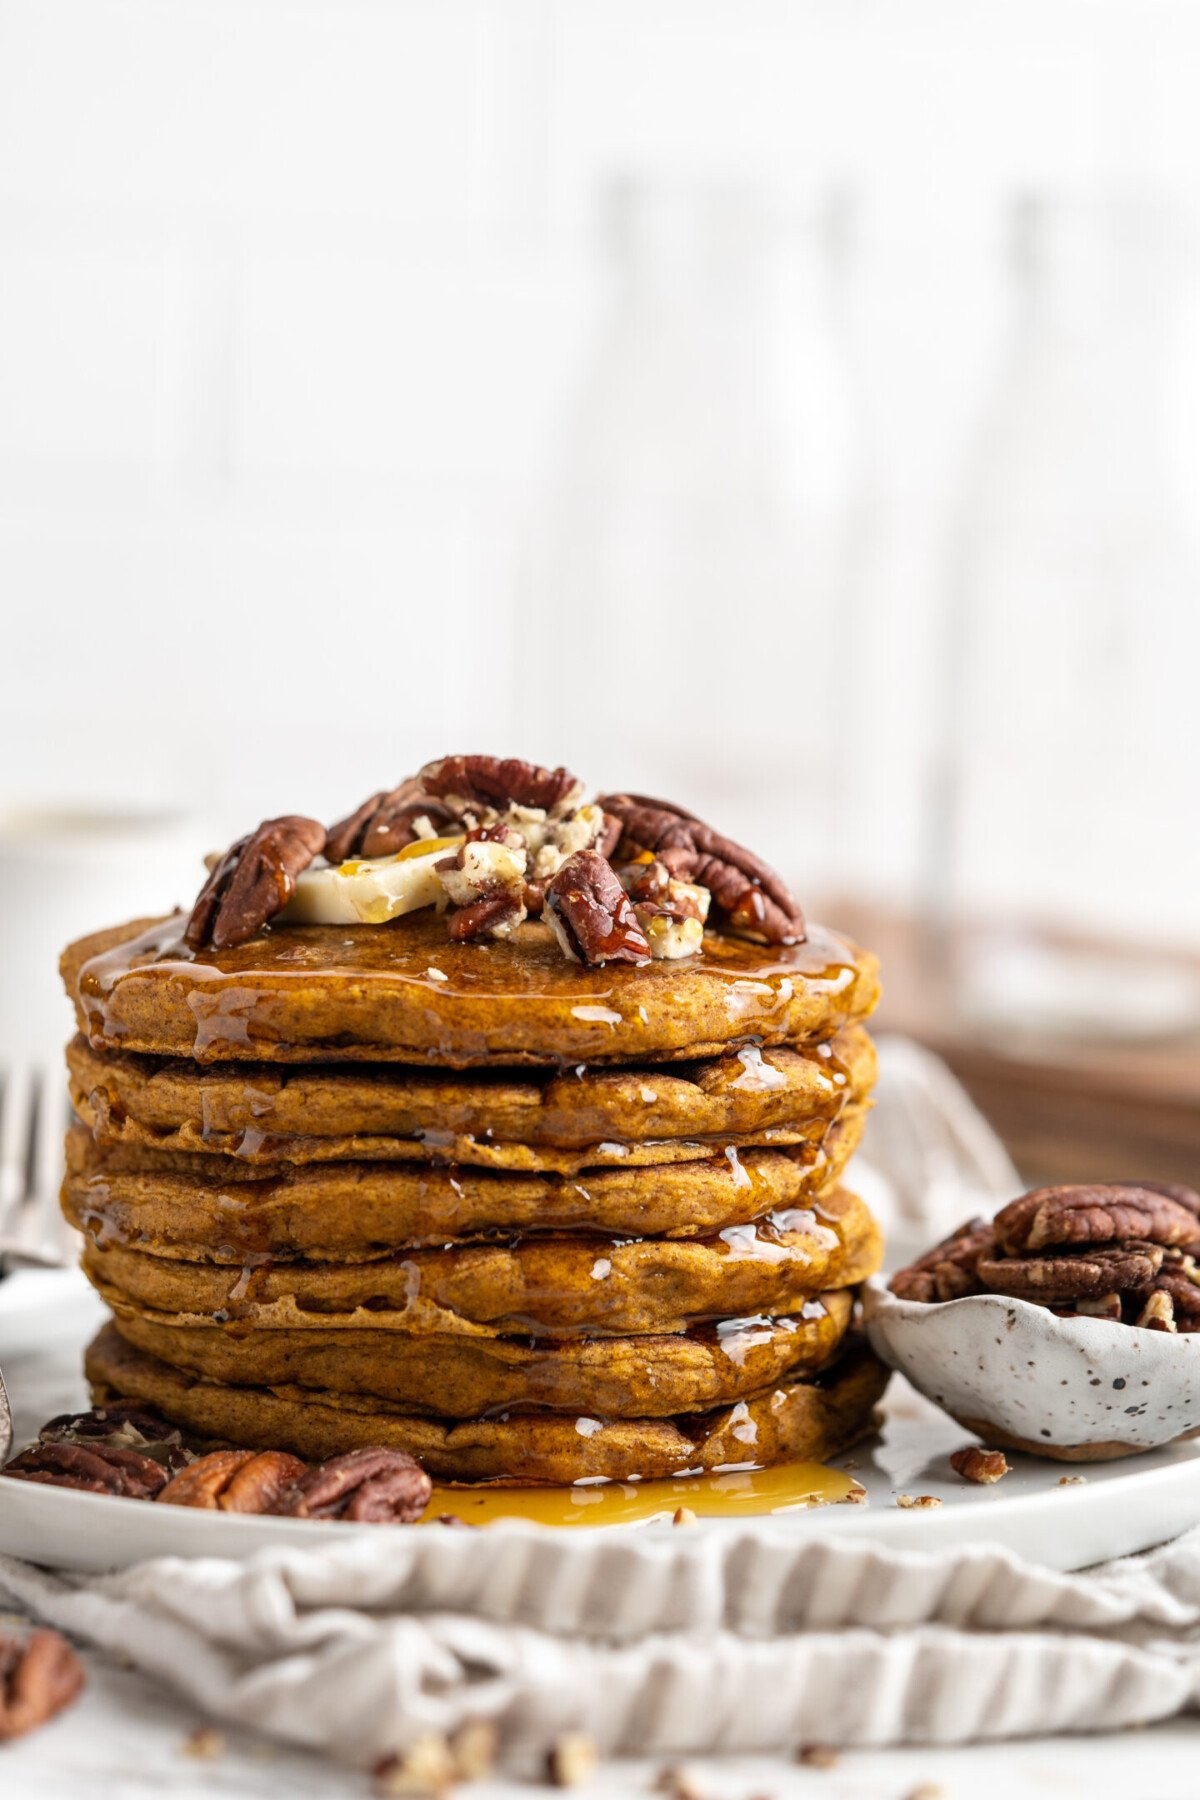 A stack of pumpkin pancakes on a plate, topped with nuts, next to a bowl of nuts.